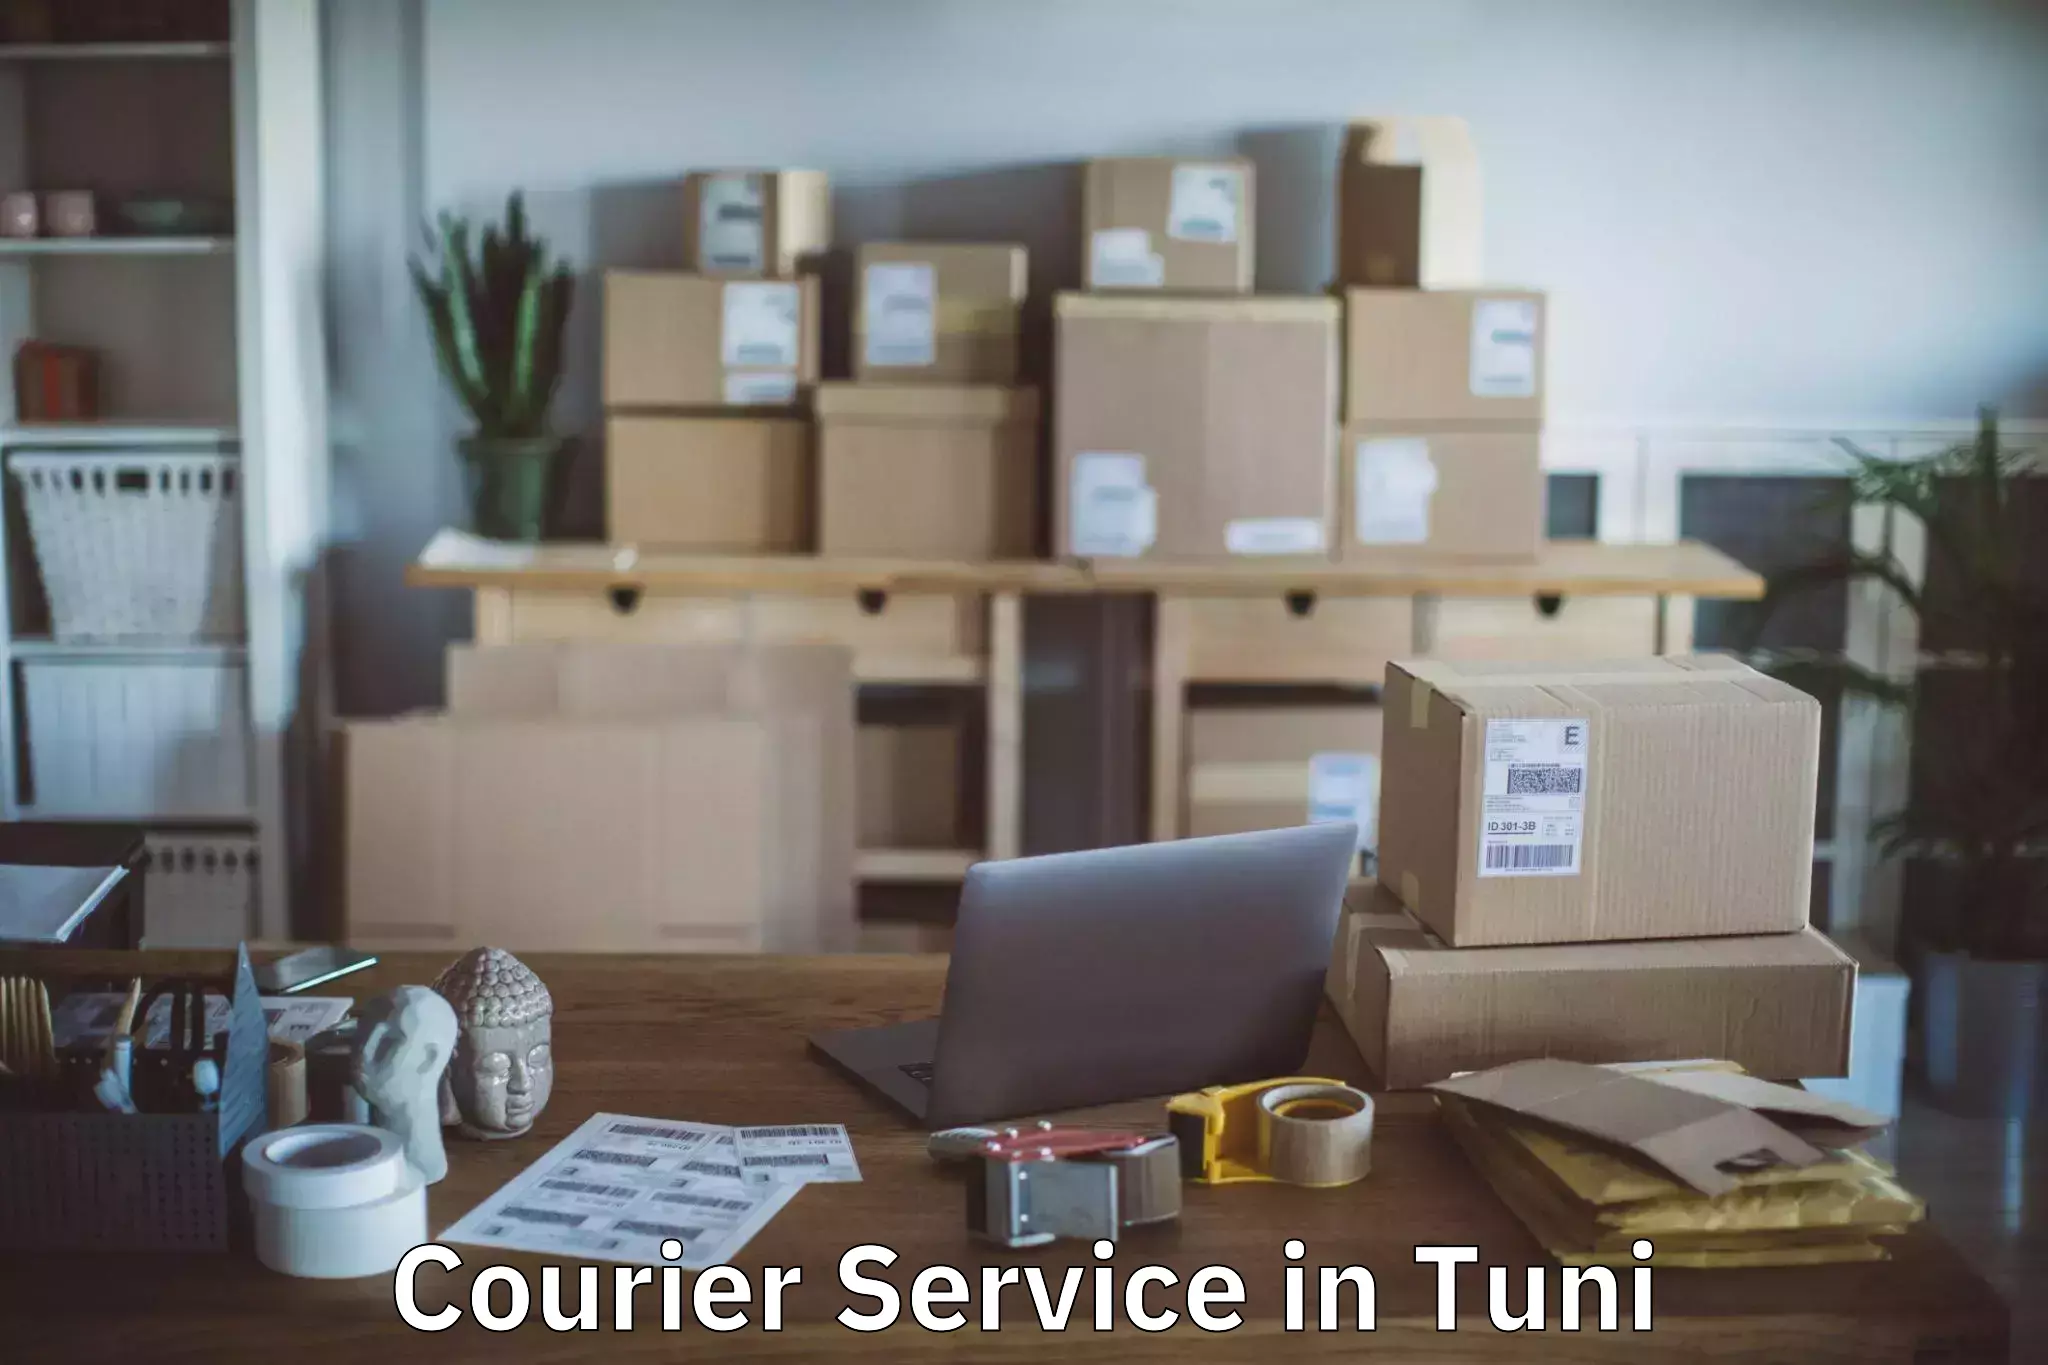 Express package handling in Tuni